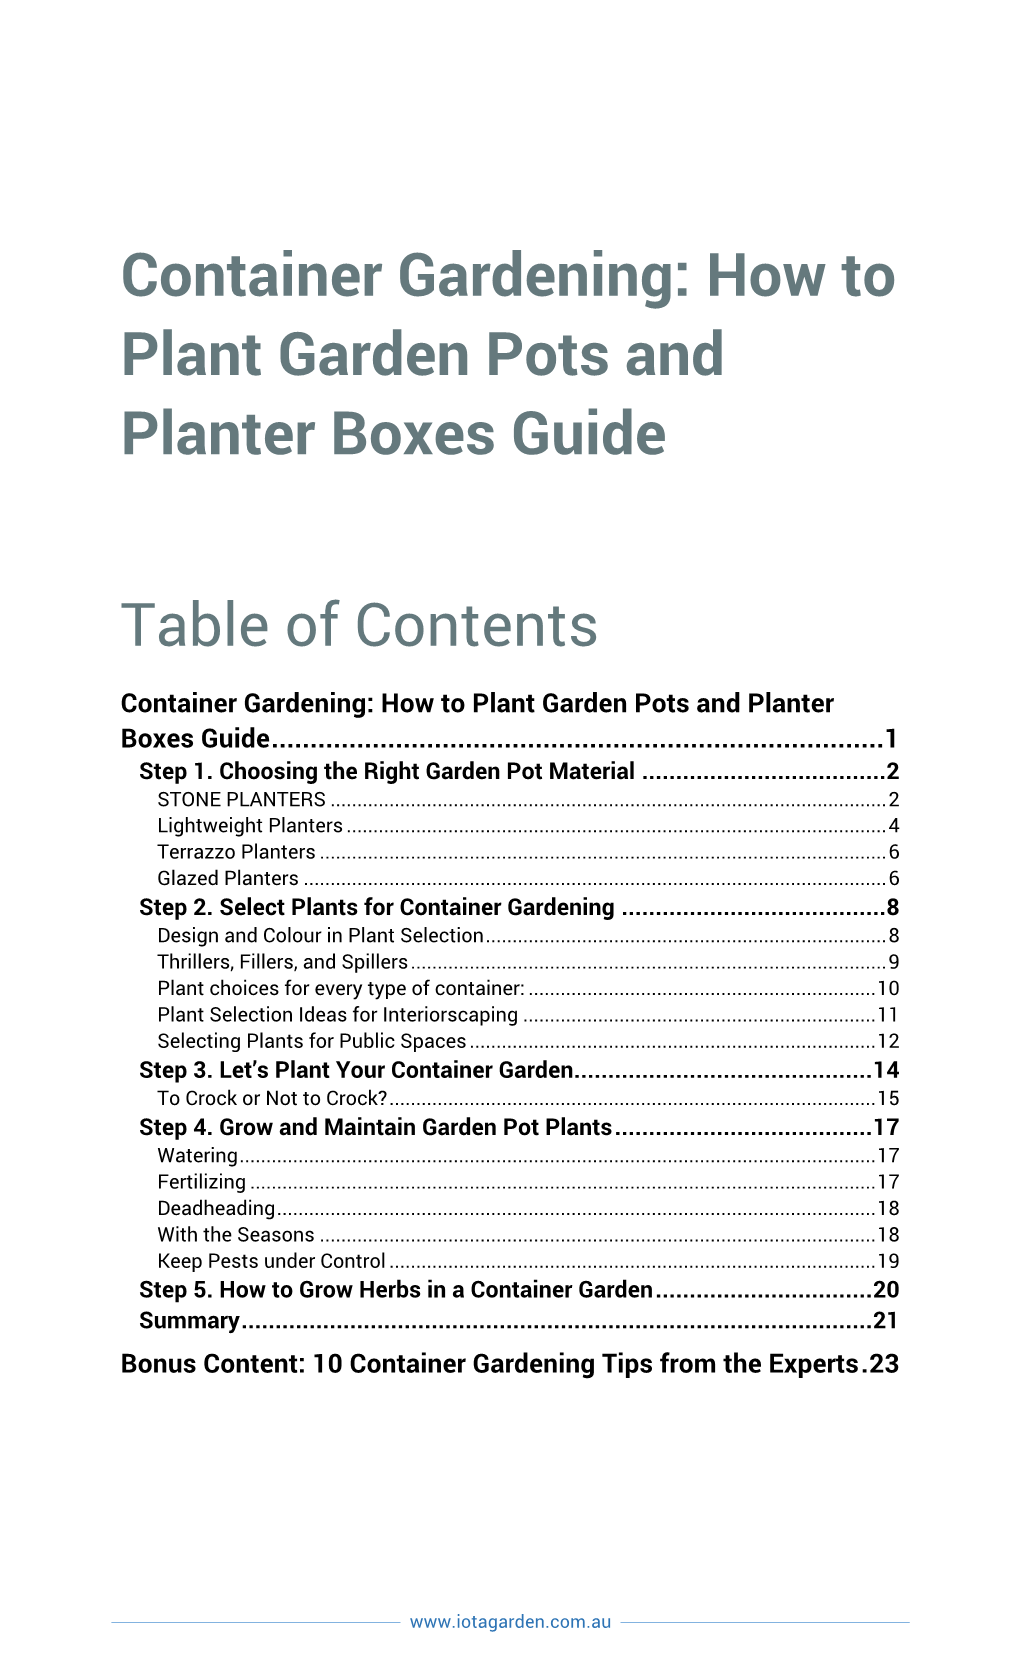 How to Plant Garden Pots and Planter Boxes Guide with Bonus Content